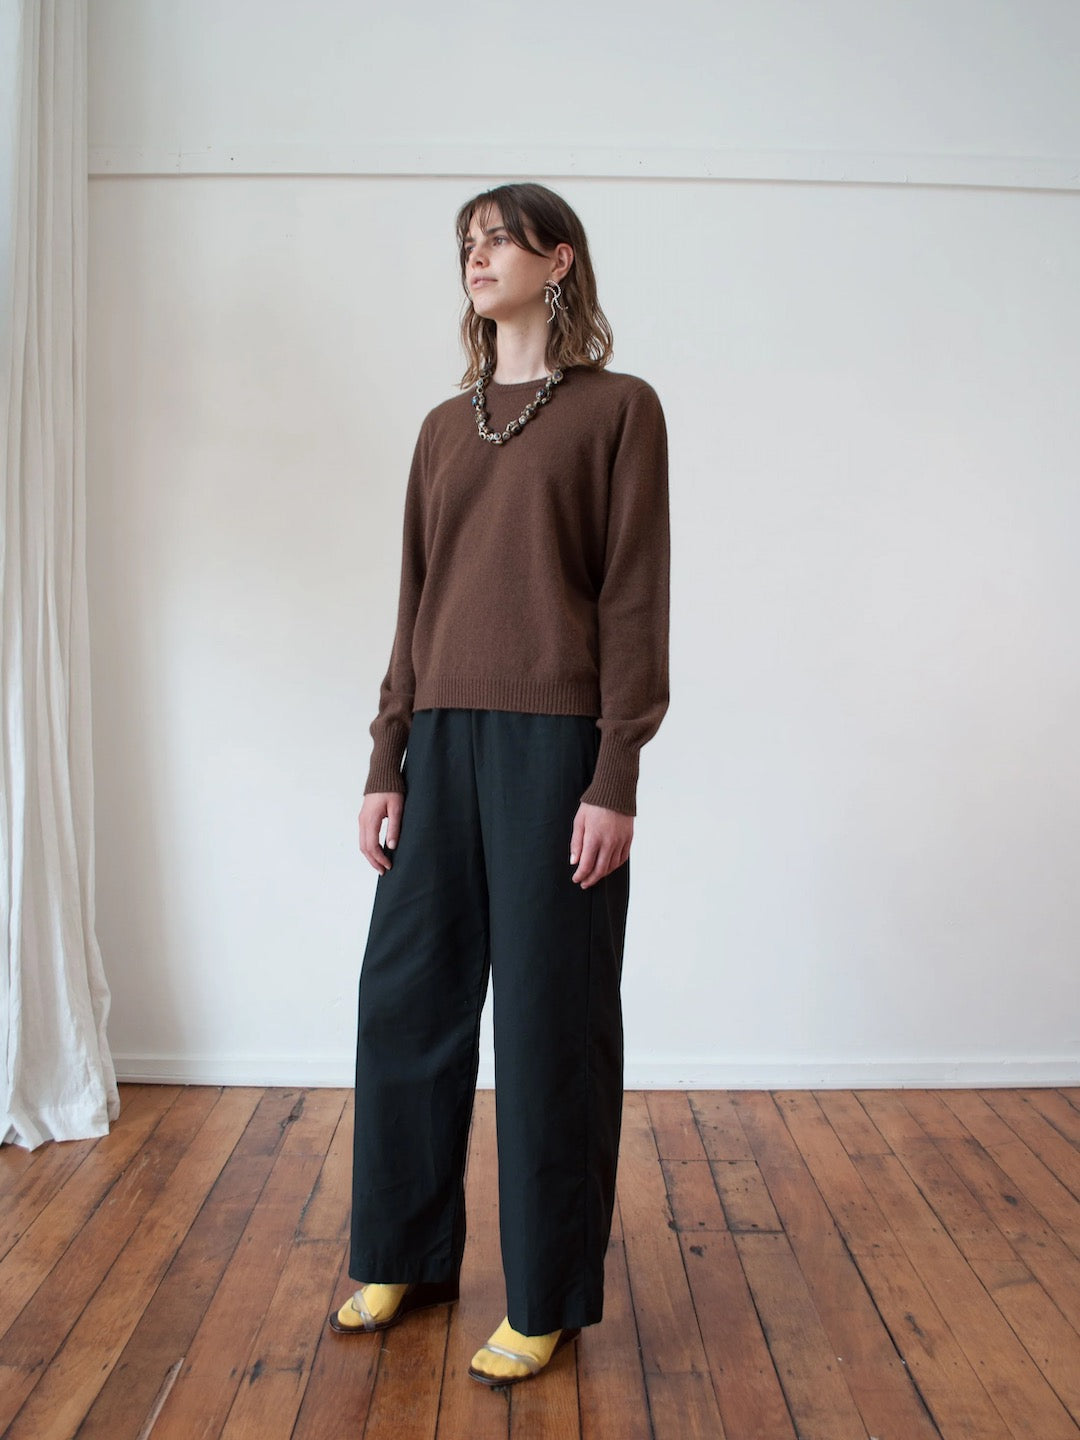 A woman standing in a room wearing an OVNA OVICH Kom Jumper – Mud and wide leg pants.